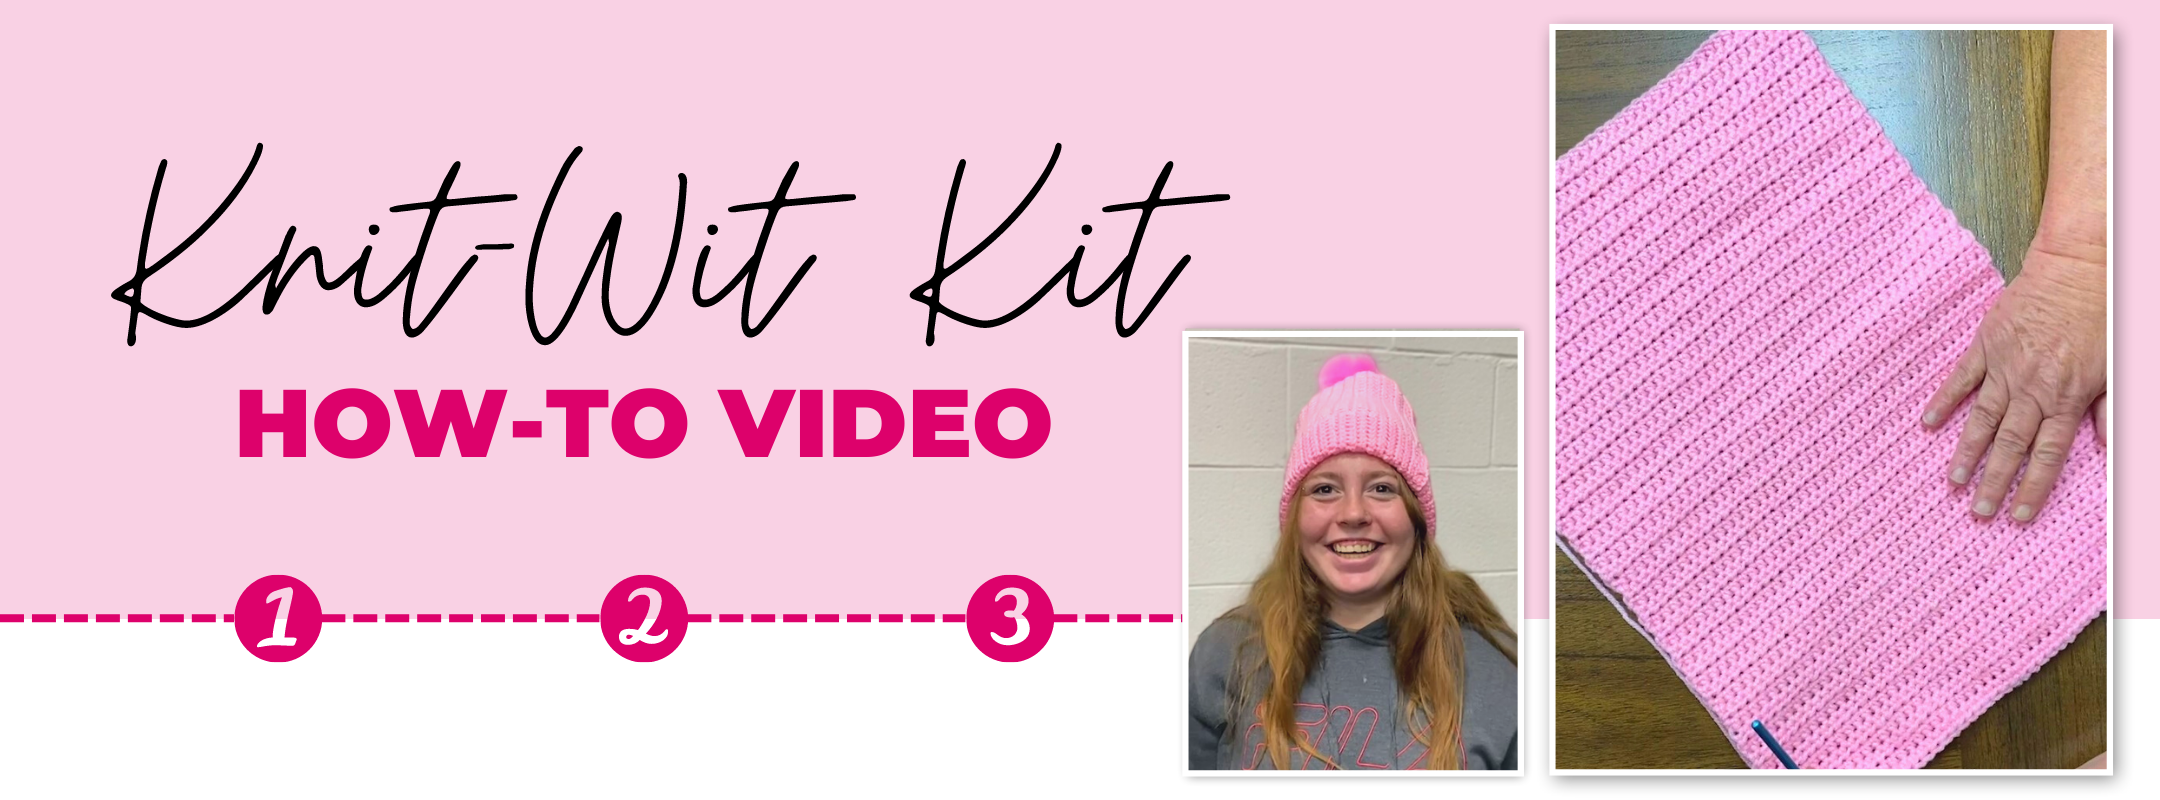 Knit-Wit Kit: How-To Video